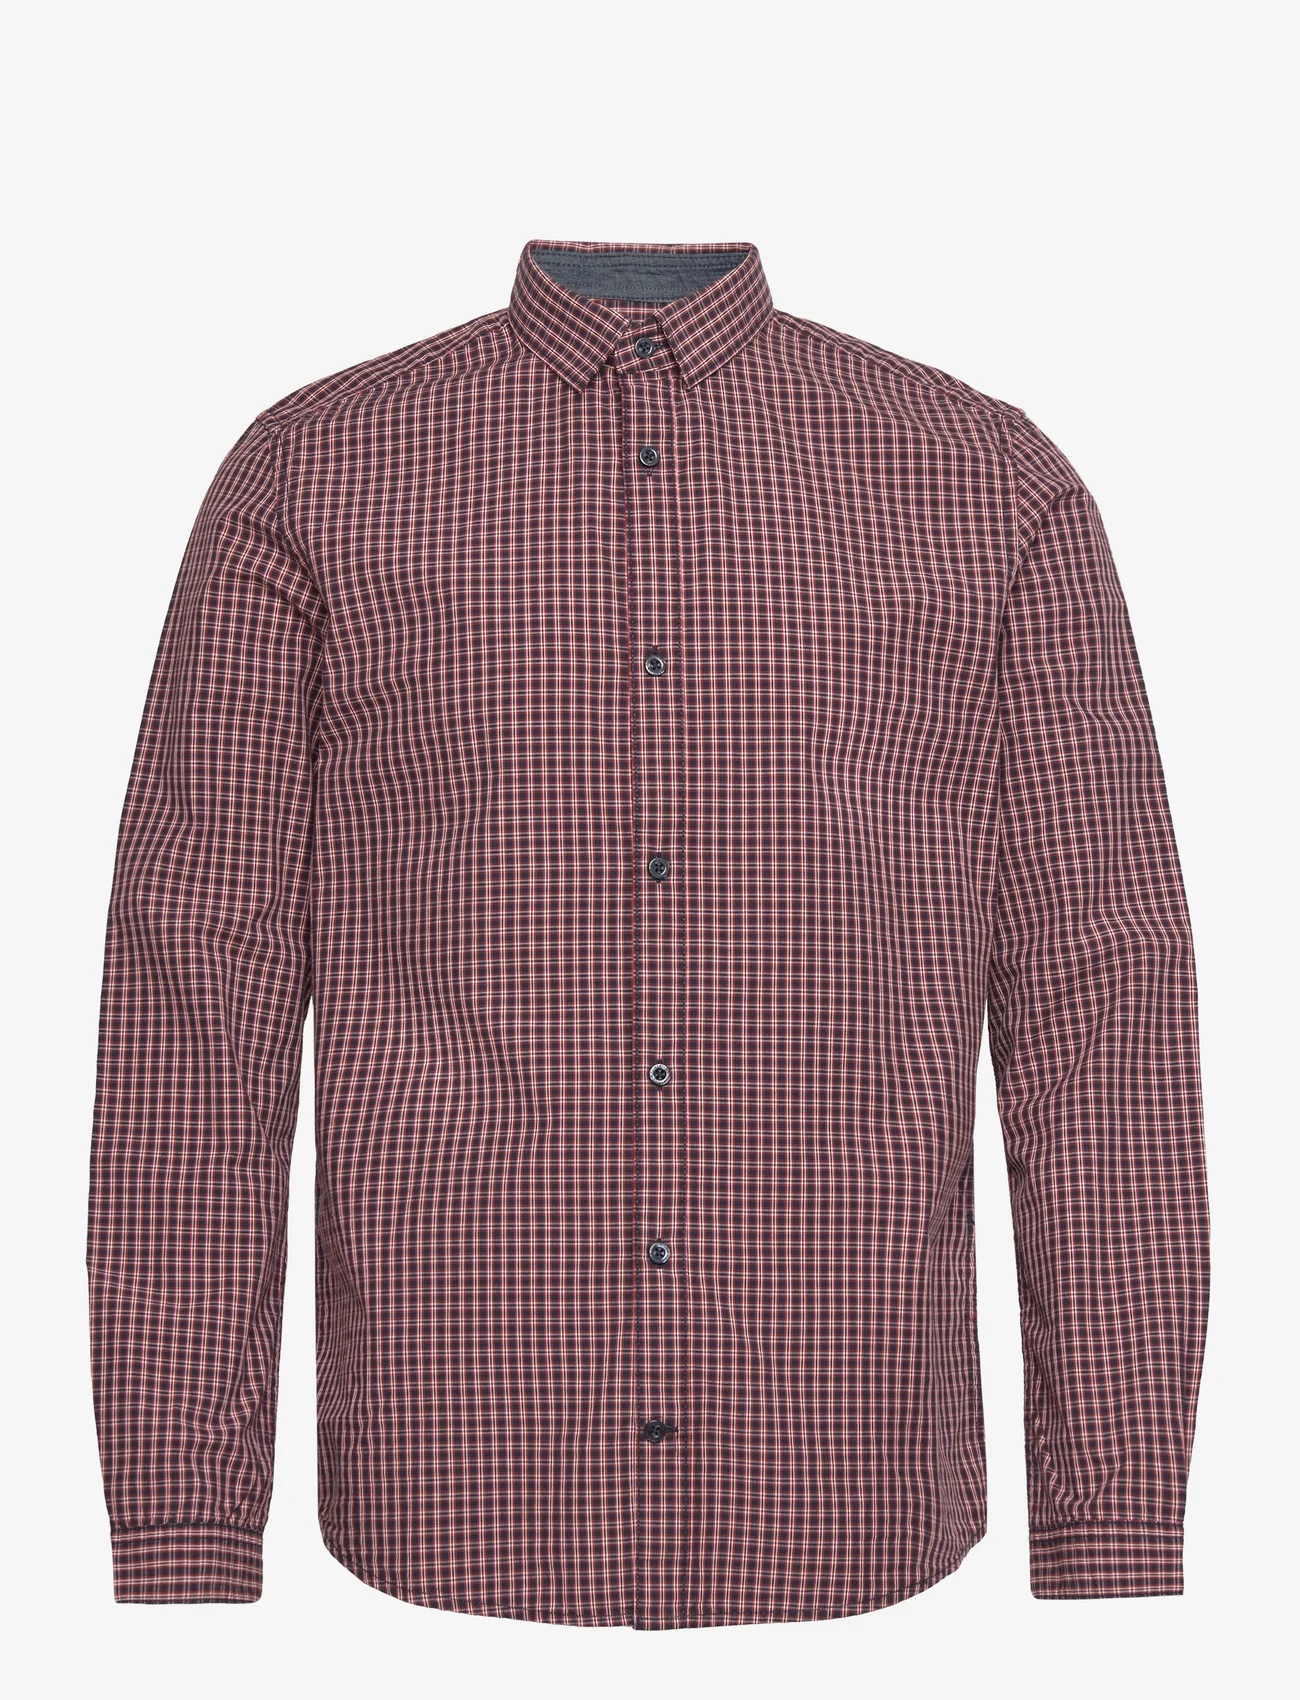 Tom Tailor - checked shir - casual skjortor - navy red small check - 0